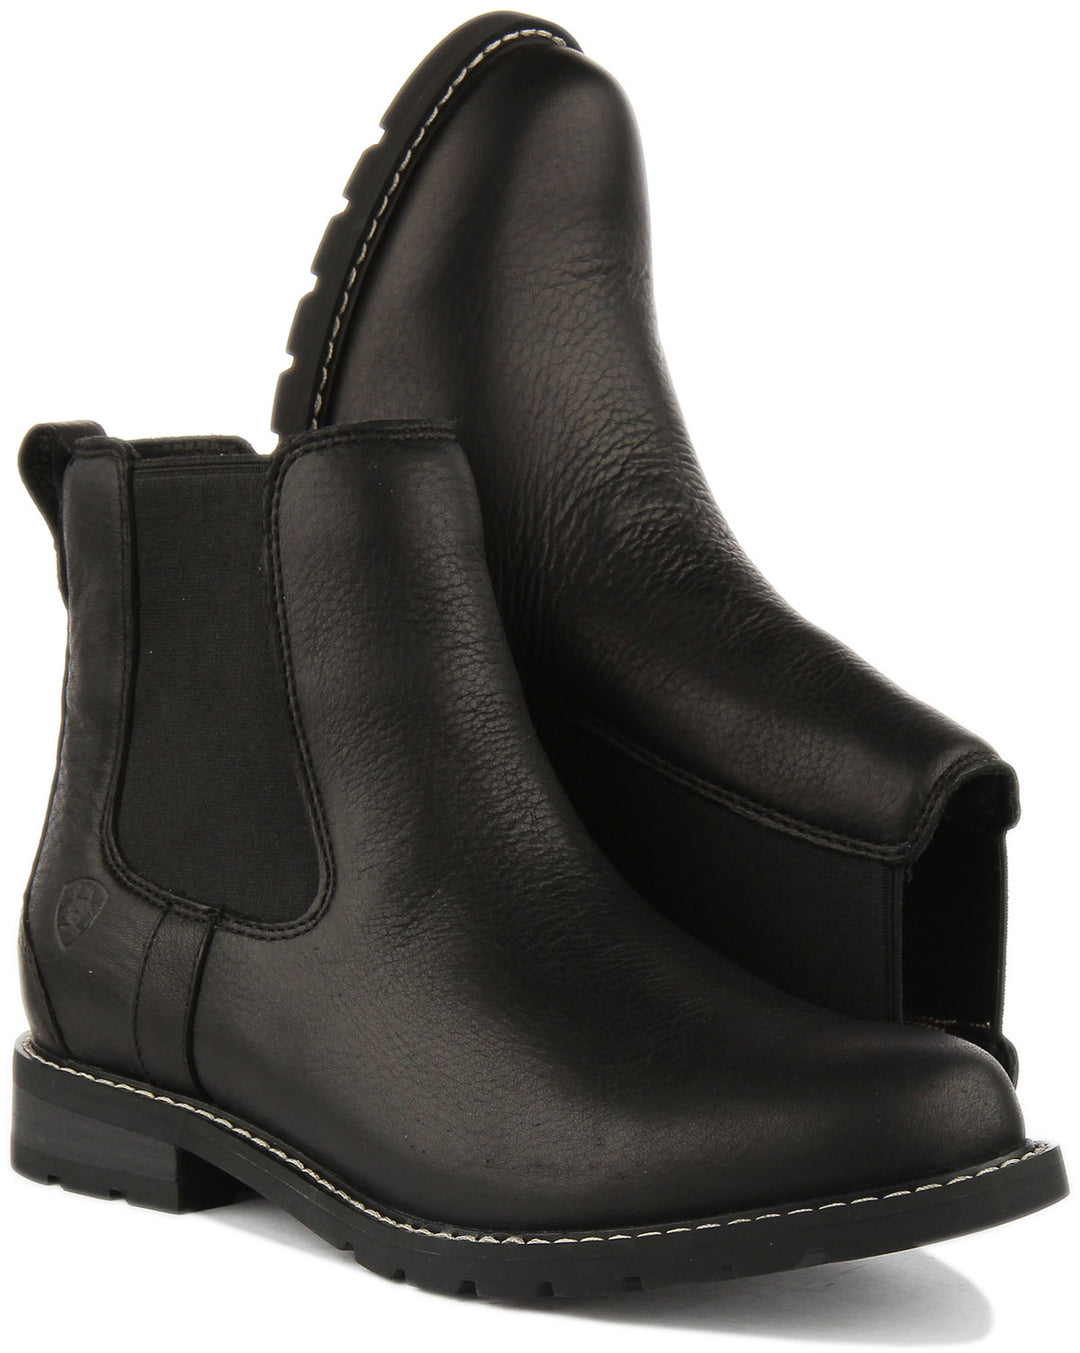 Ariat Wexford H2O Botas Chelsea Twin Gore Tex Impermeables para mujer en negro